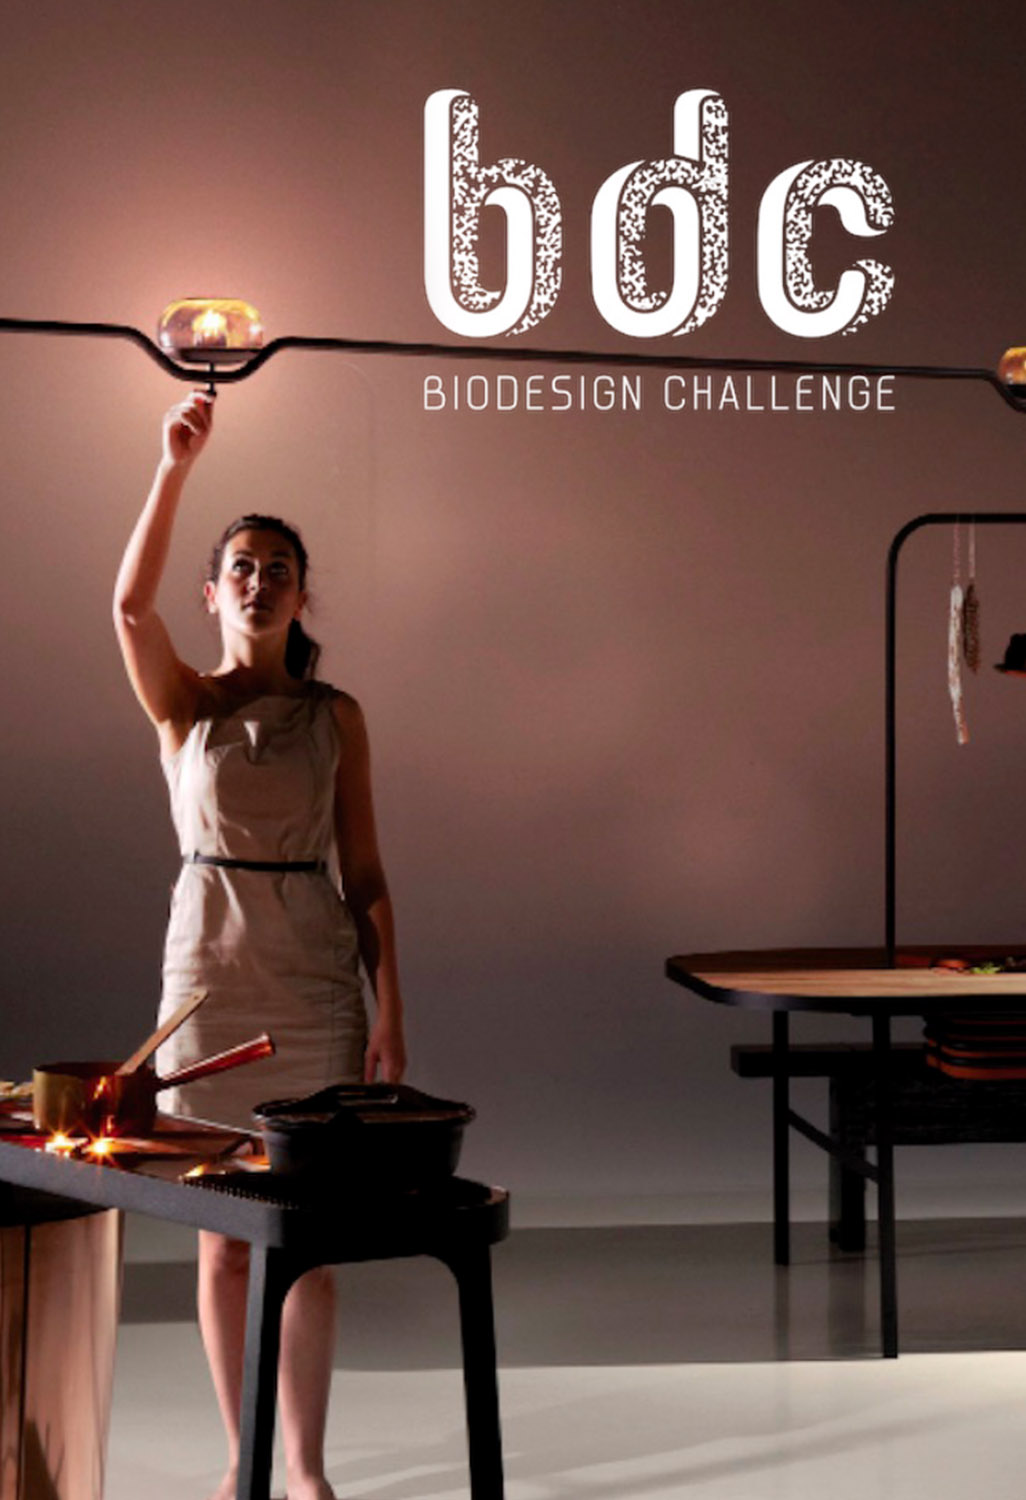 Poster with a woman wearing a white dress reaching up to a lightbulb with a table in front of her with two pots on it, "bdc biodesign challenge" is printed on the upper right of the poster